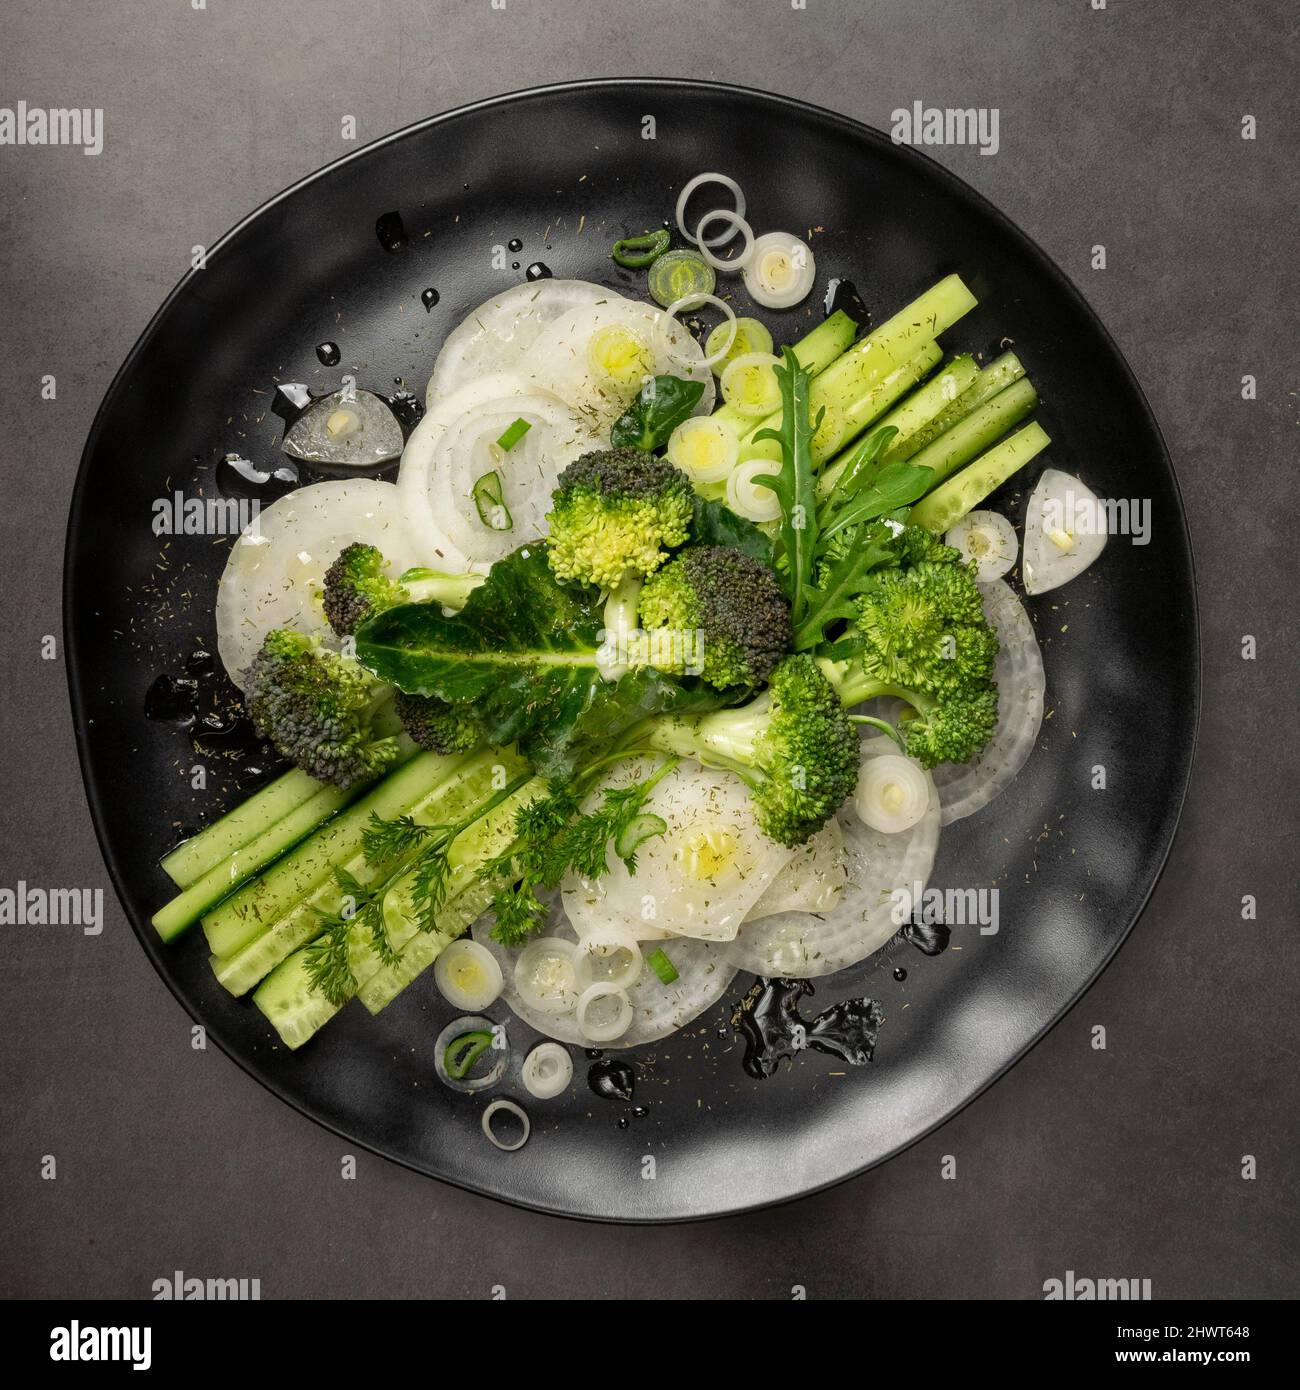 Geometric fresh salad with greenery. Black plate on black background, healthy eating concept Stock Photo